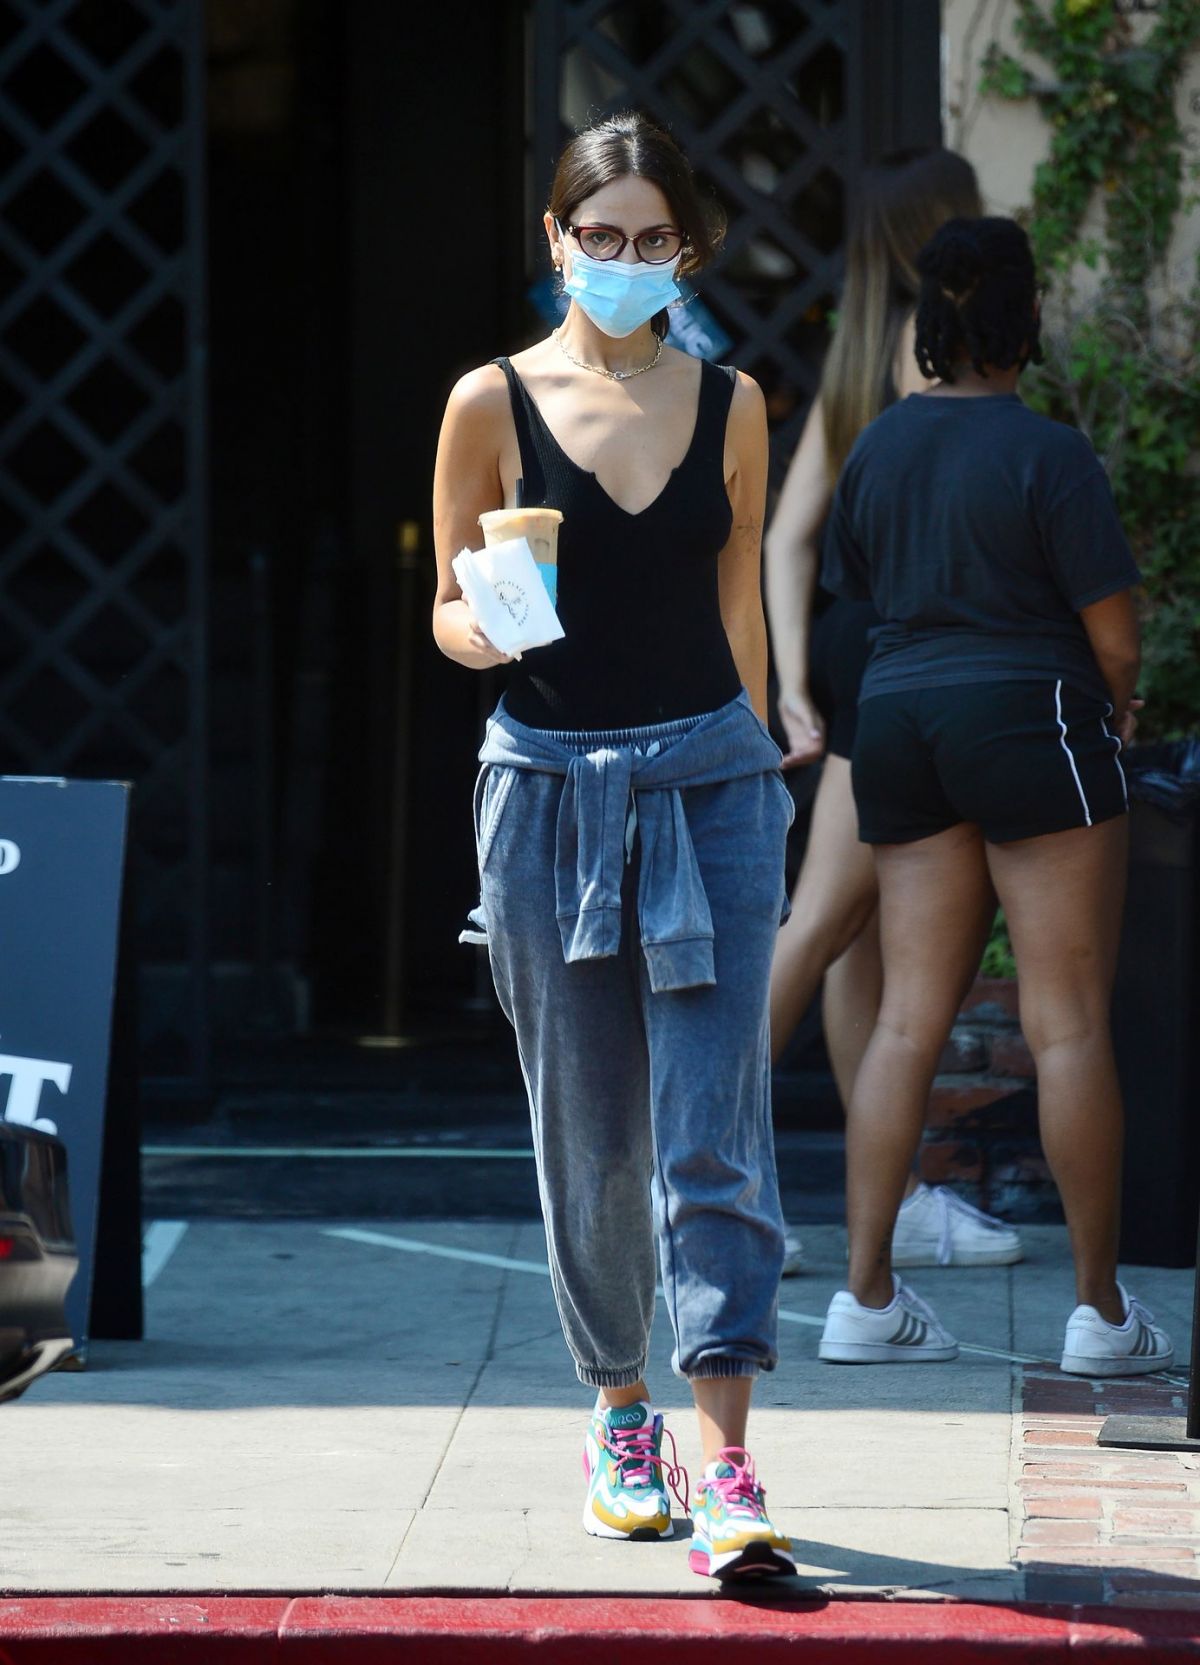 eiza-gonzalez-out-for-iced-coffee-in-west-hollywood-08-20-2020-11.jpg